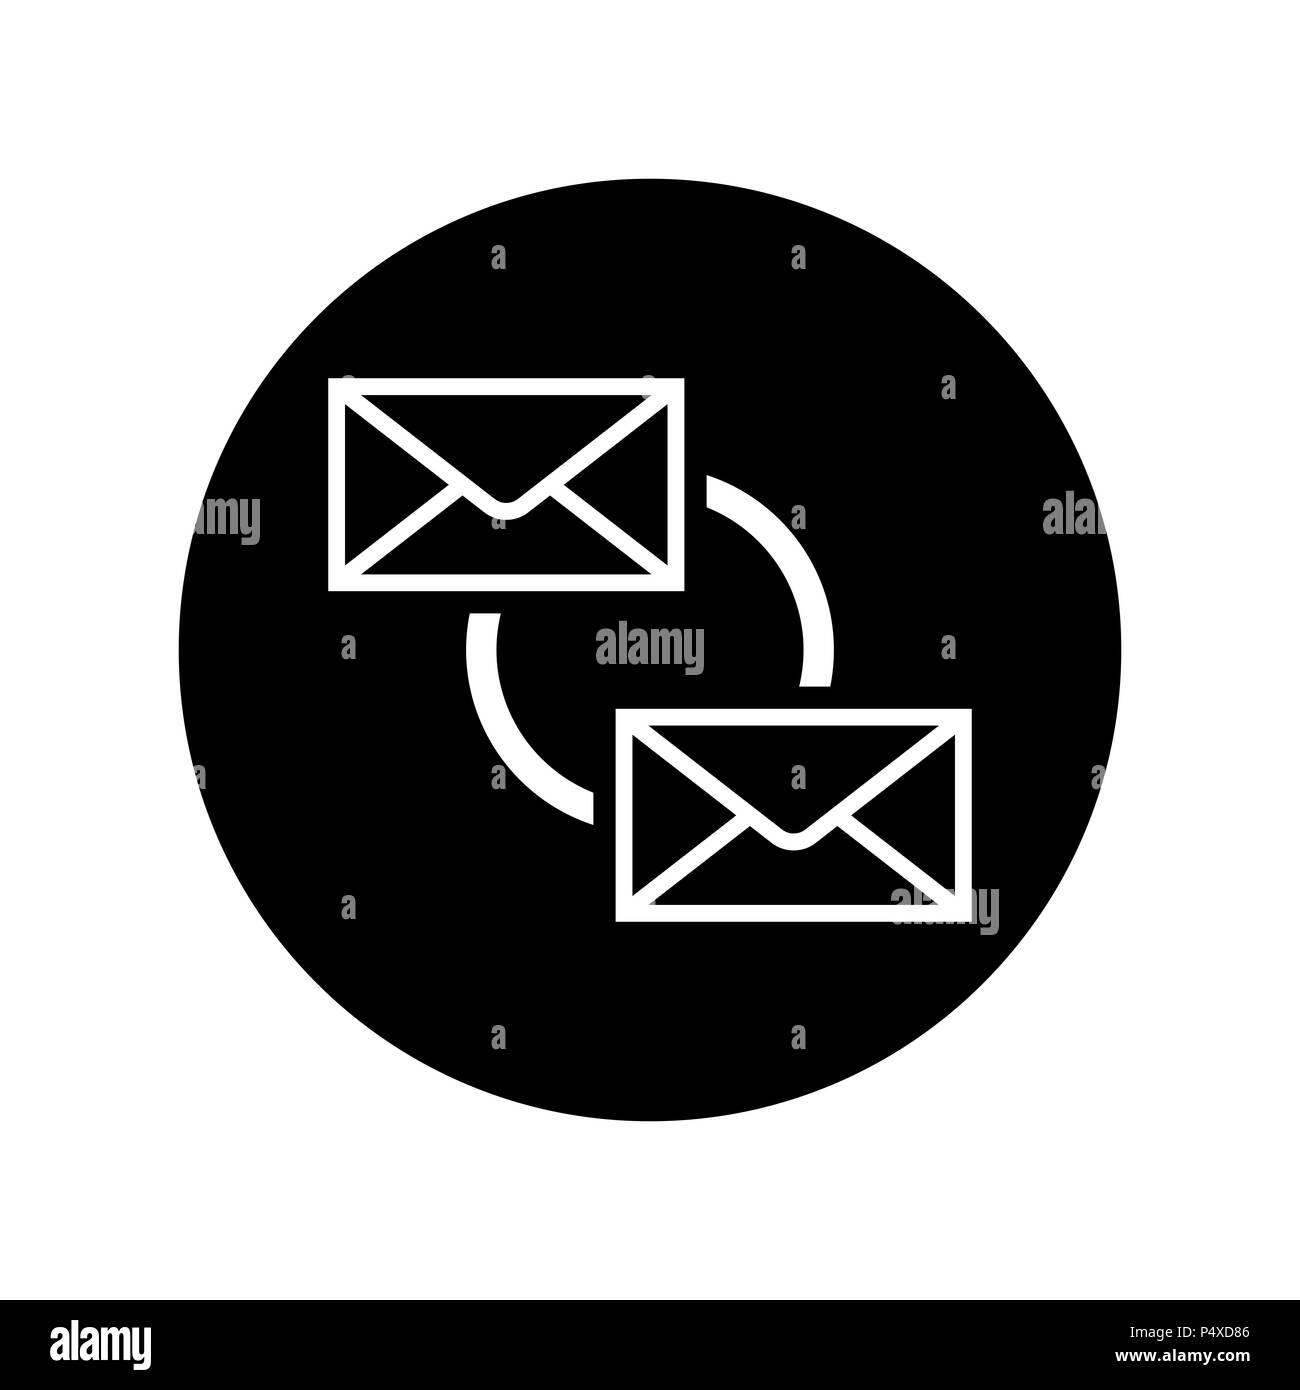 Synchronize icon in black circle Email sync symbol Stock Vector